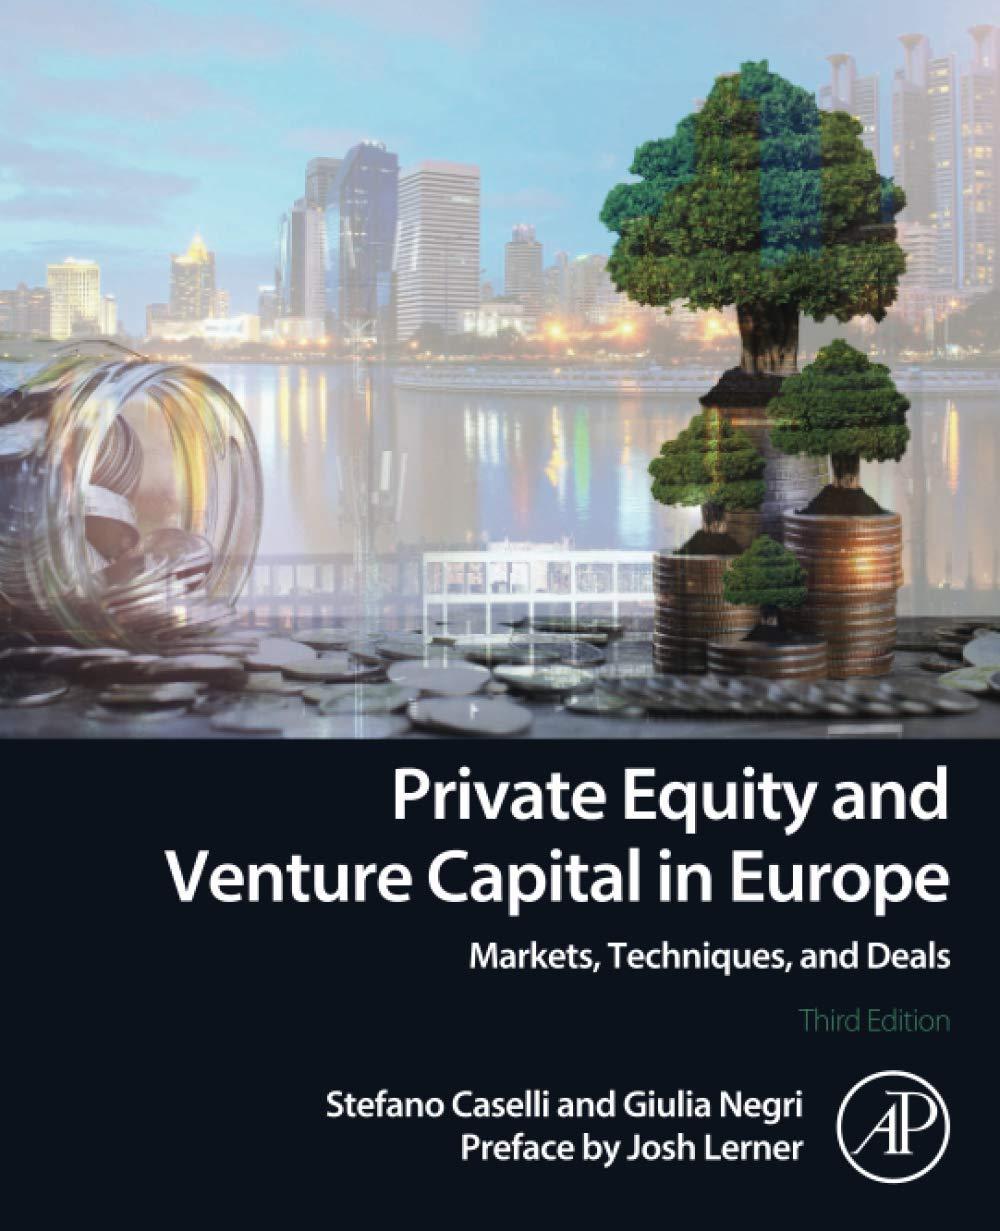 private equity and venture capital in europe 3rd edition stefano caselli, giulia negri 032385401x,